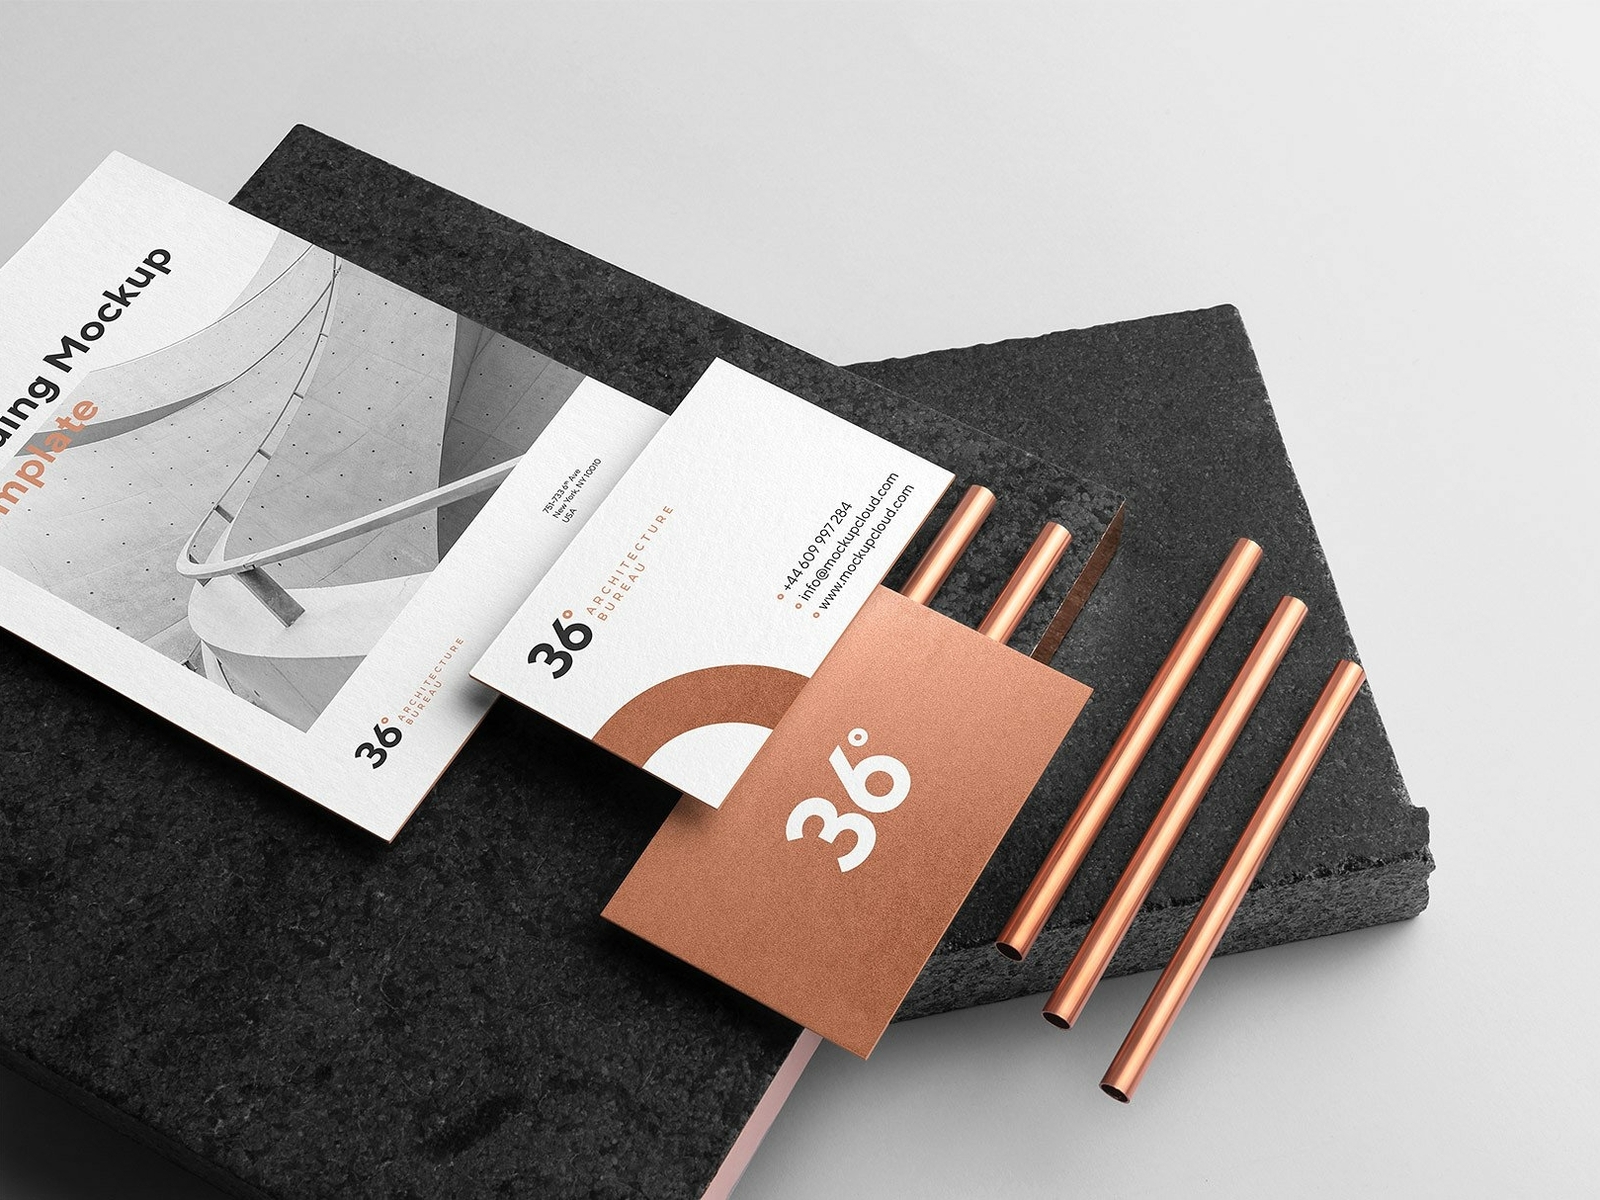 Download Copperstone Branding Mockup Vol 1 By Mockup5 On Dribbble